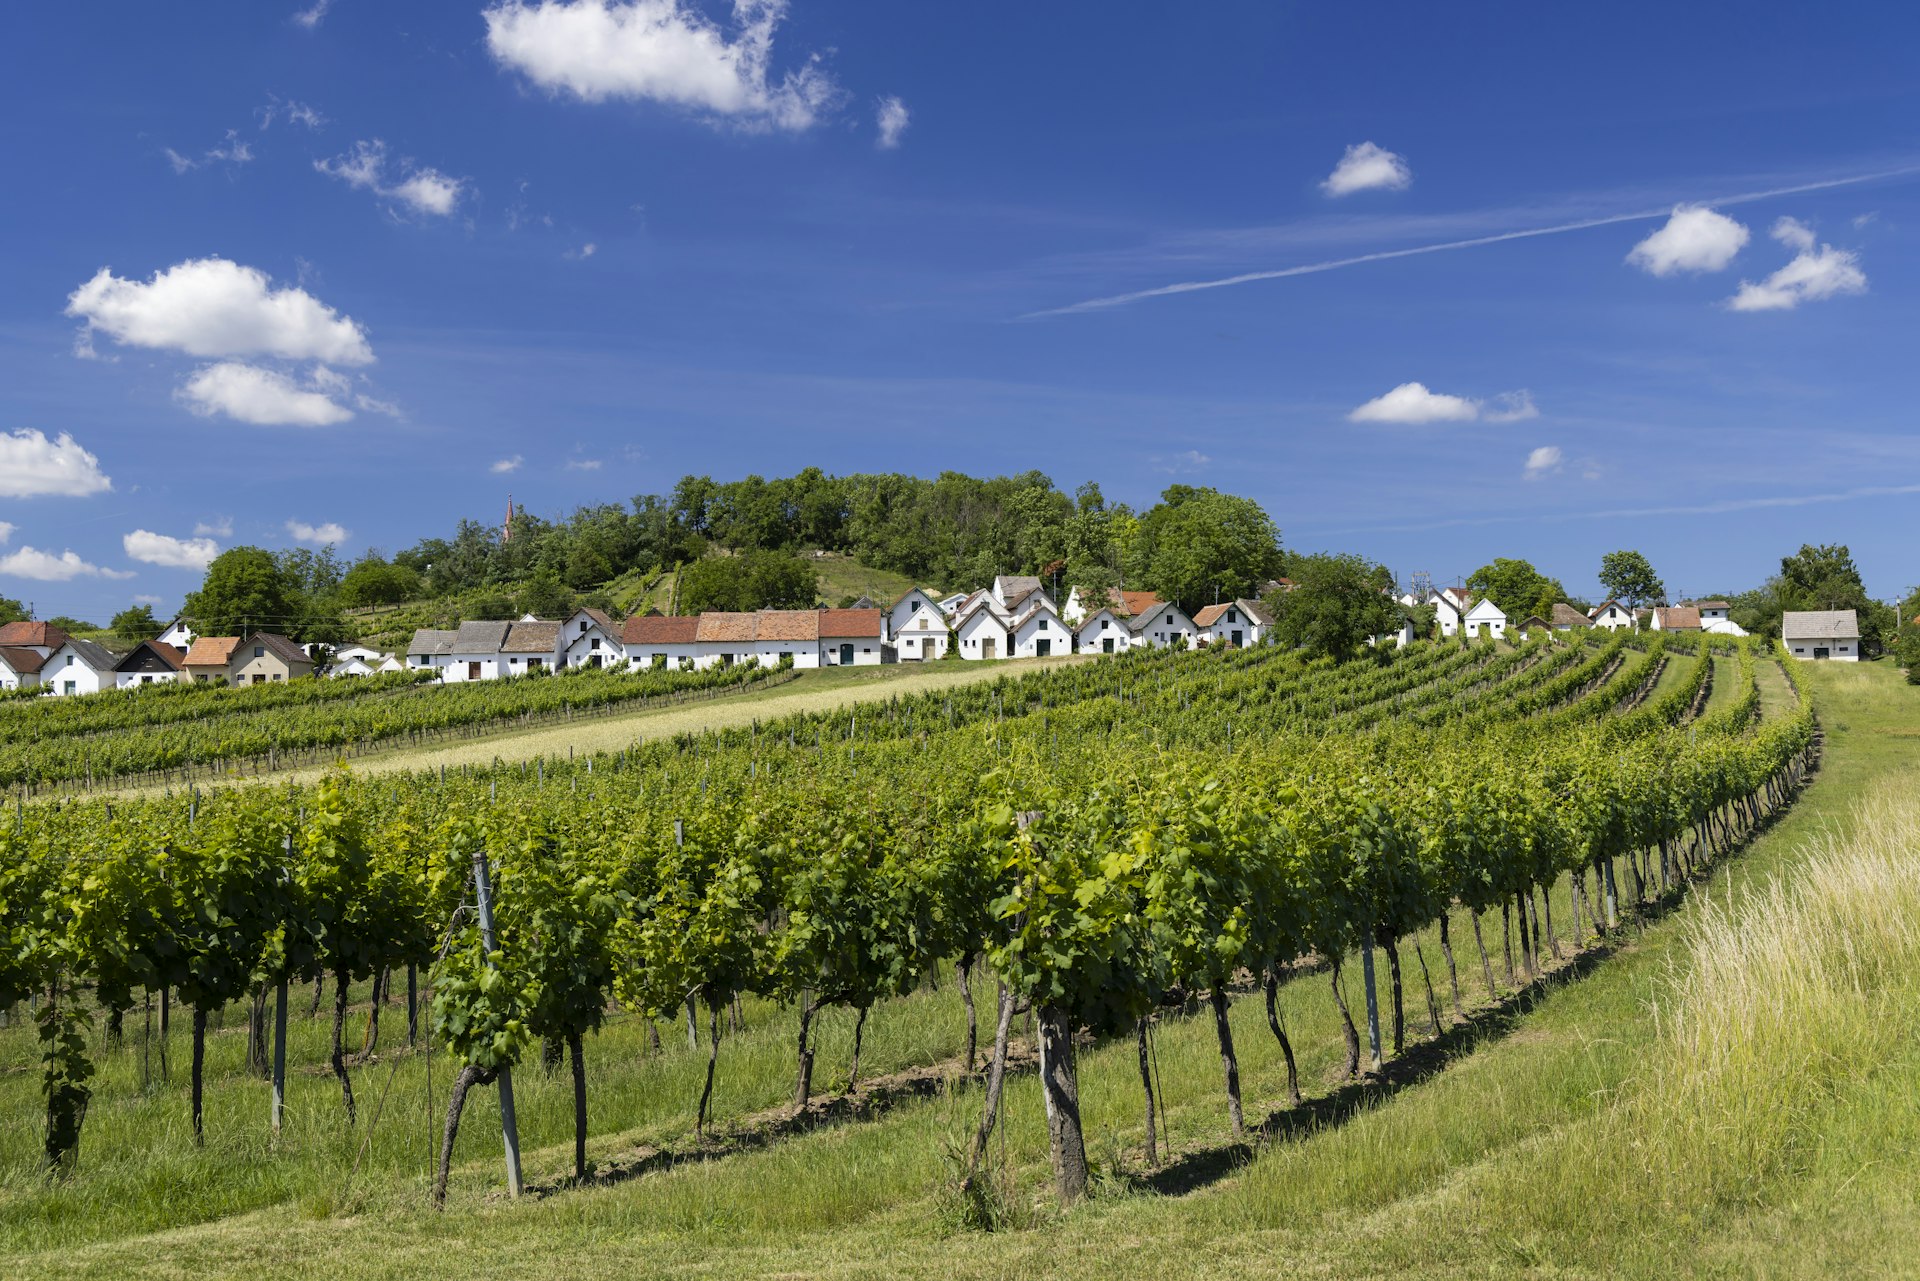 A vineyard has many neat rows of grapevines growing up a hill, leading towards a little village of whitewashed houses.